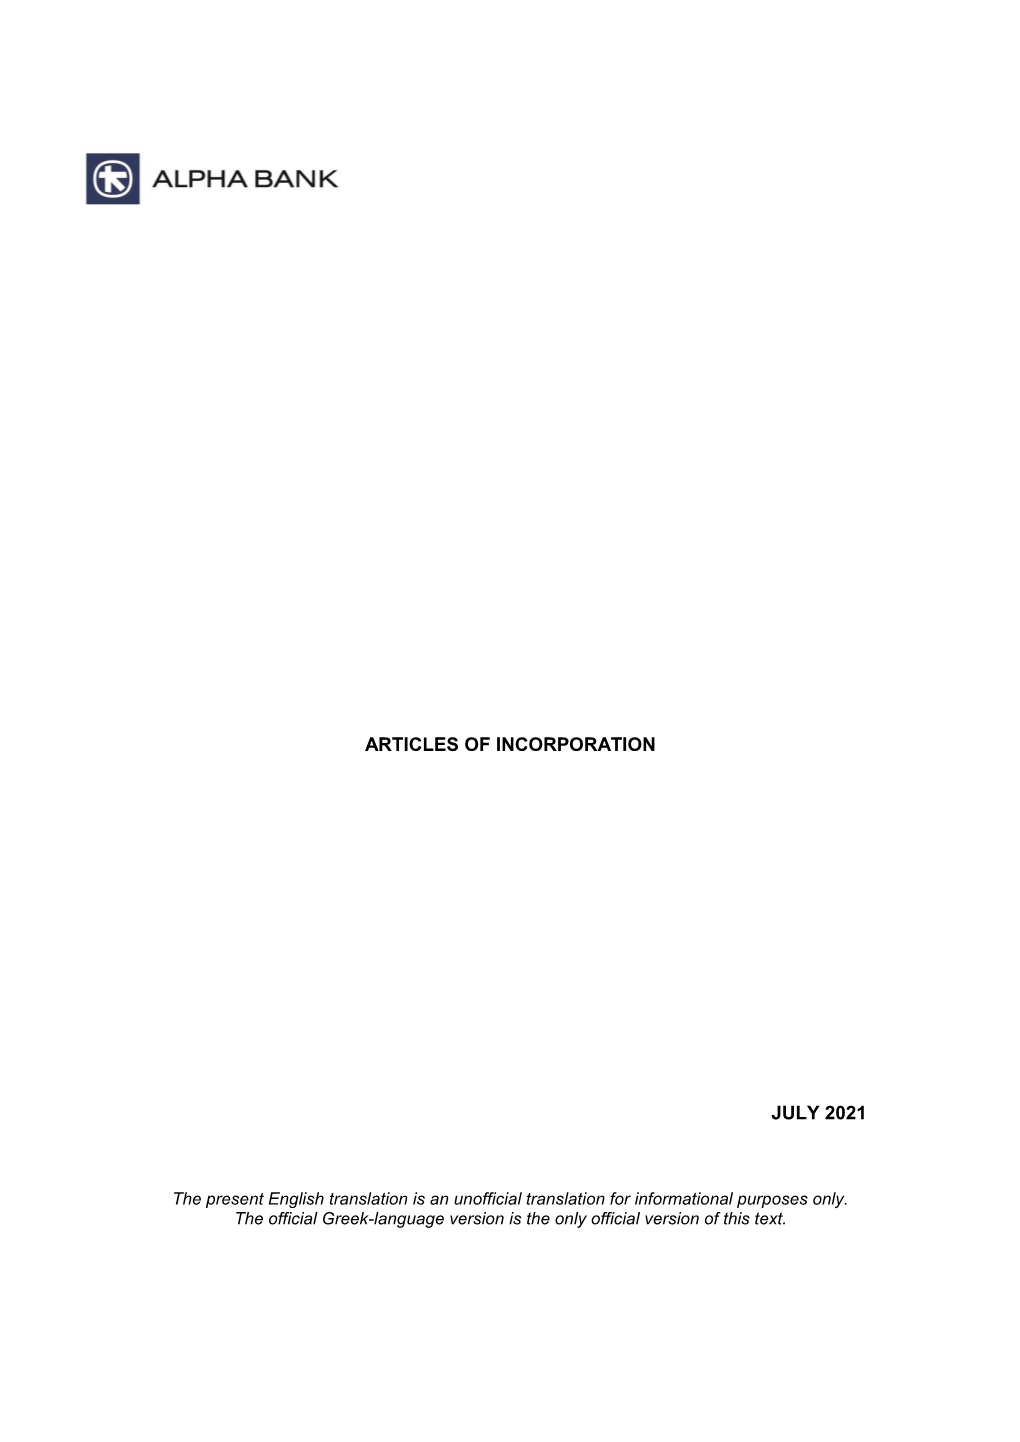 Articles of Incorporation July 2021